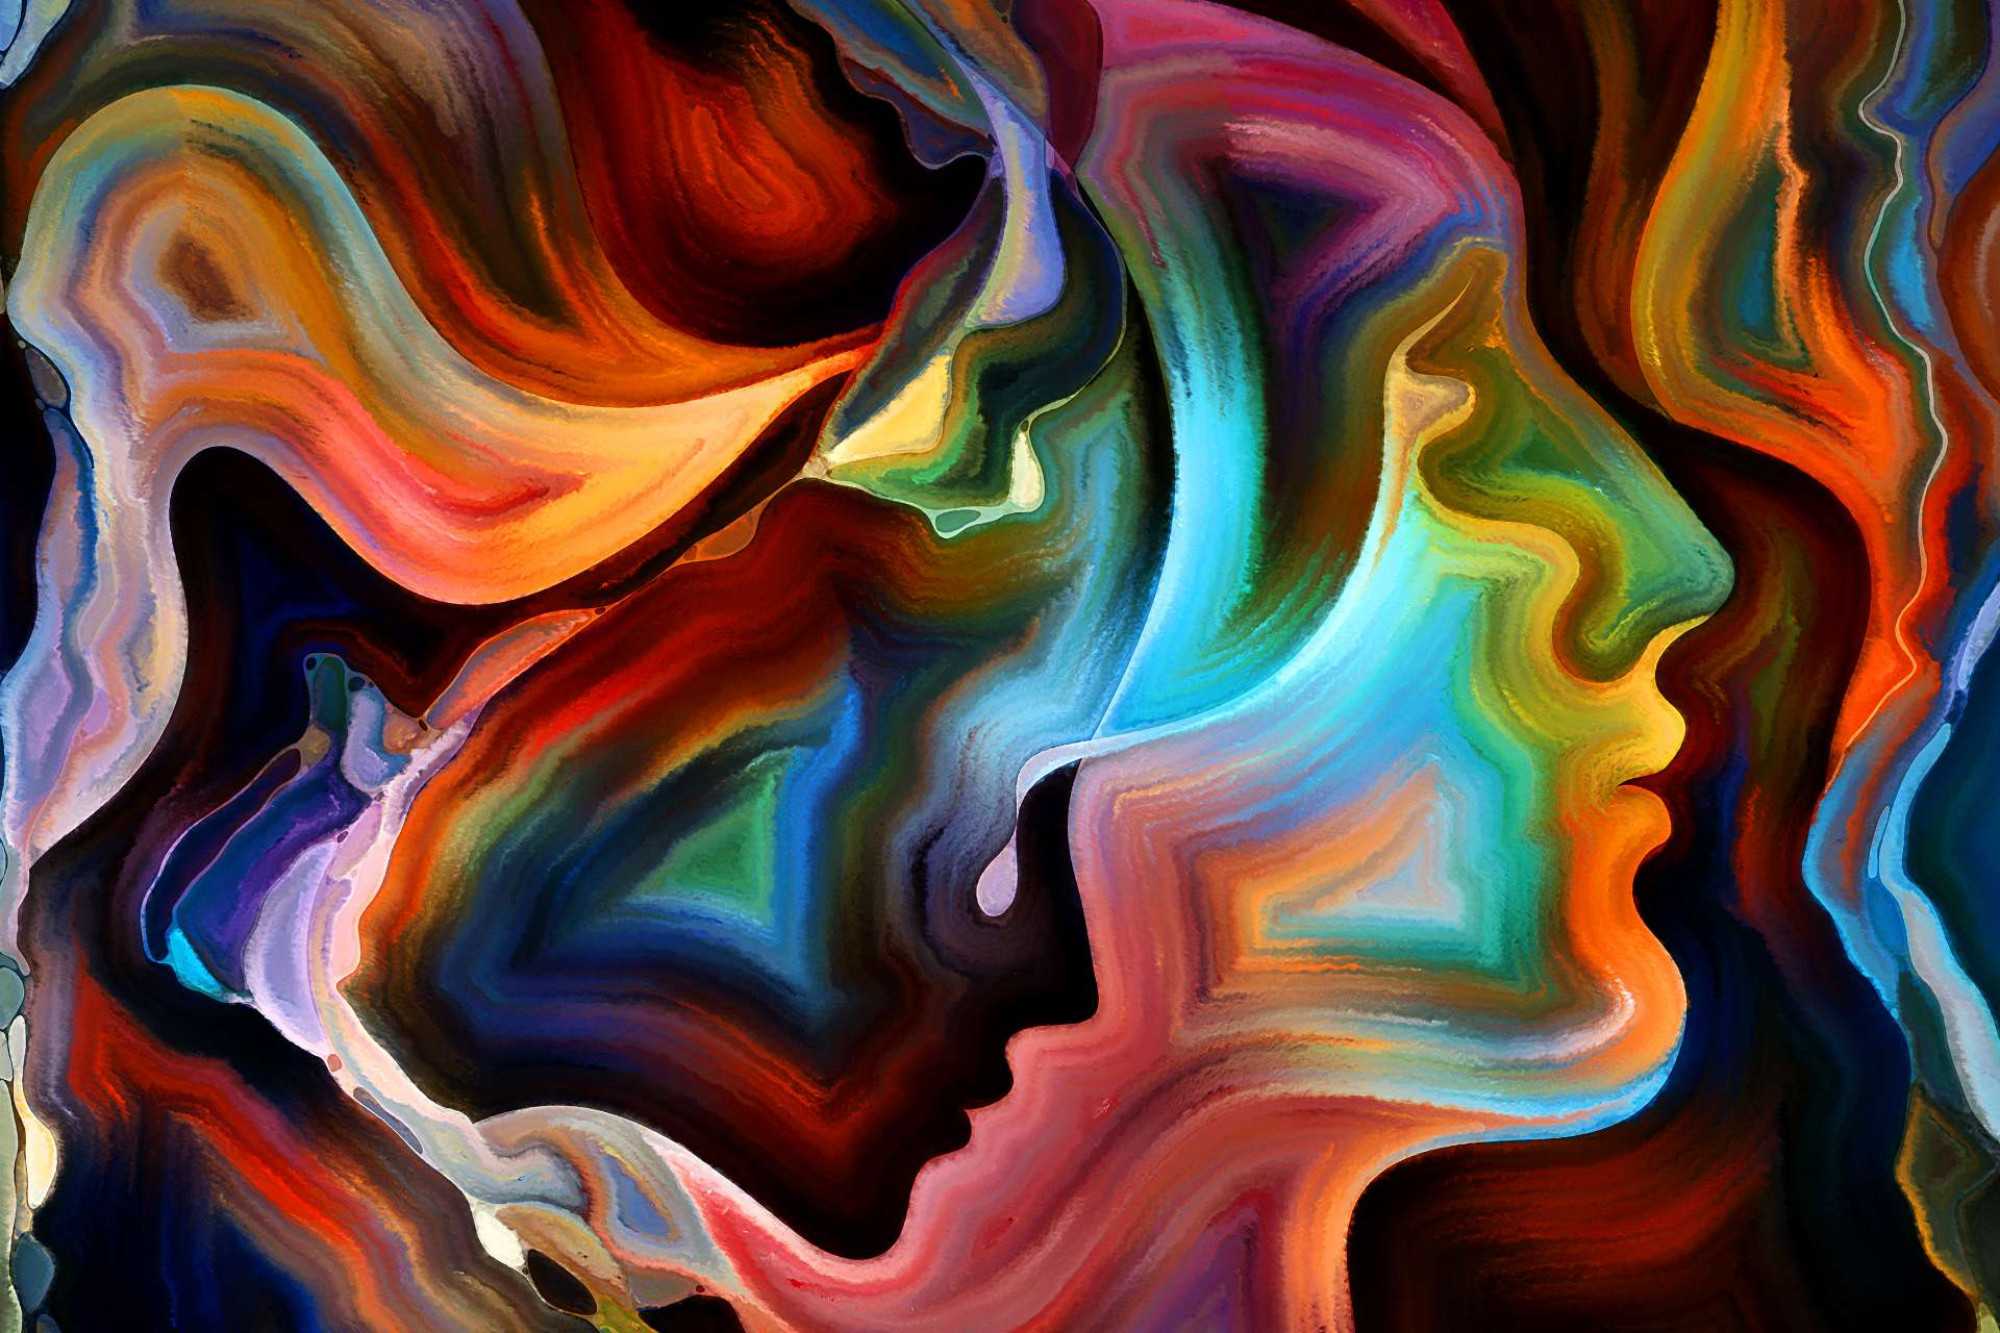 Abstract image of two faces in profile